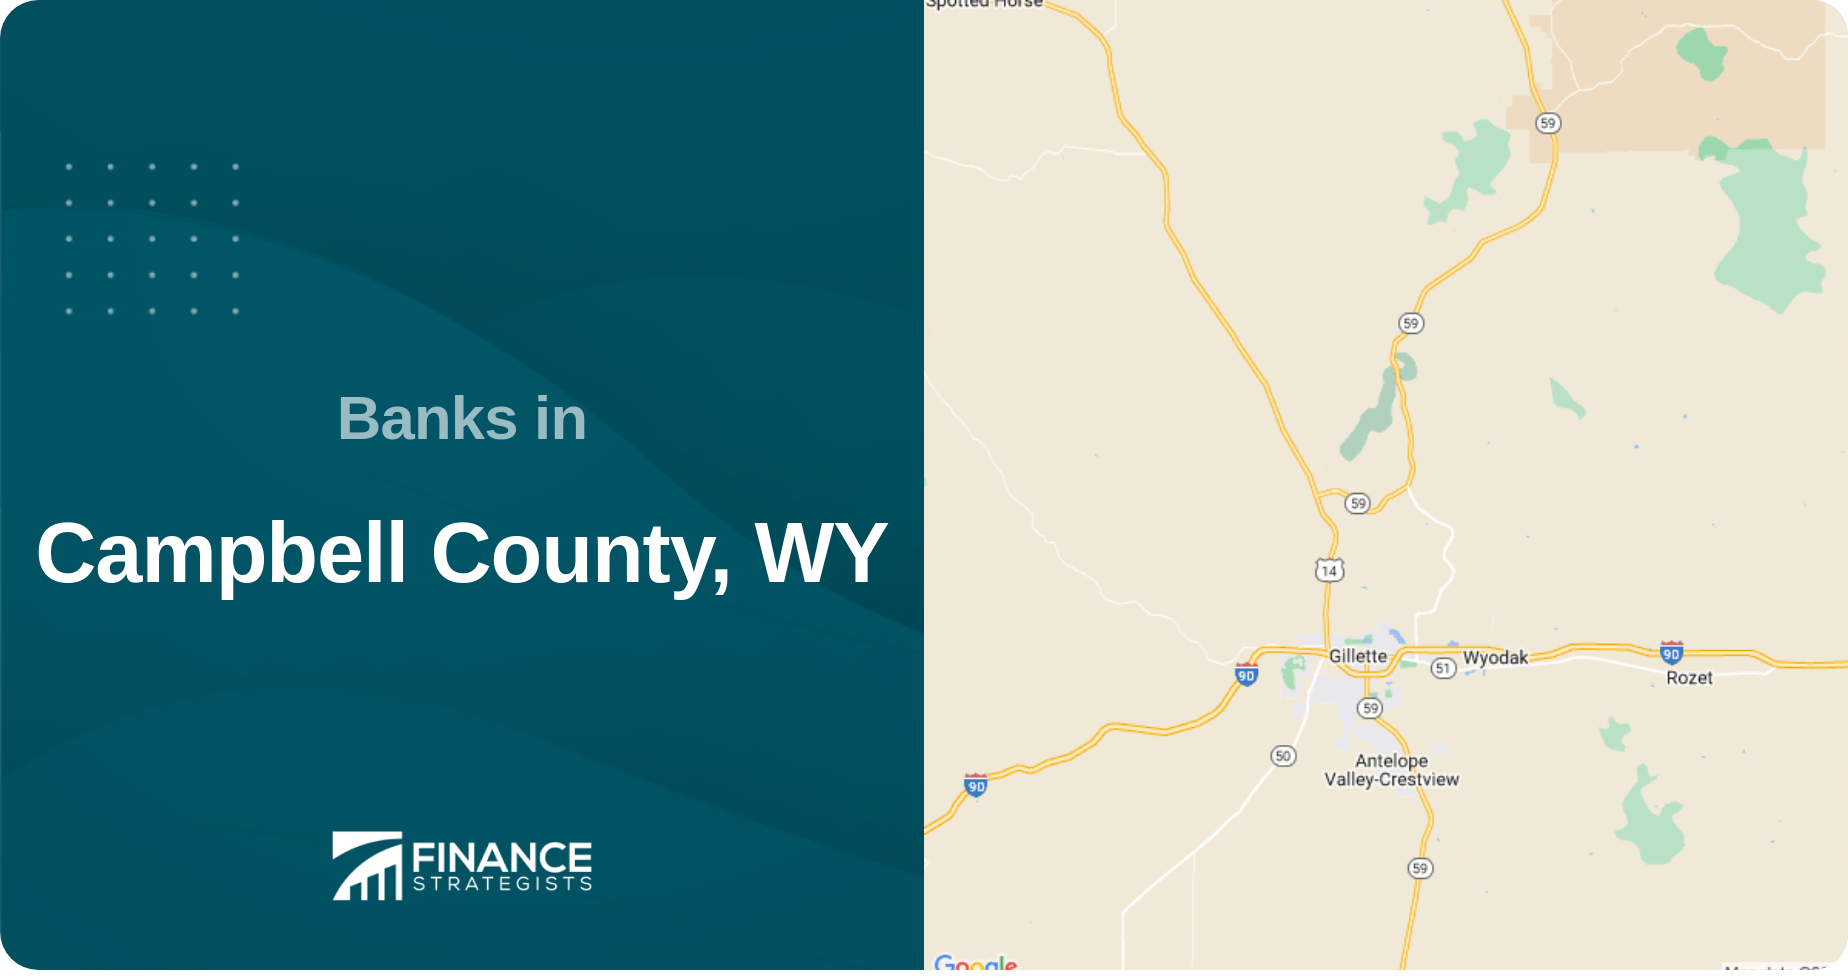 Banks in Campbell County, WY